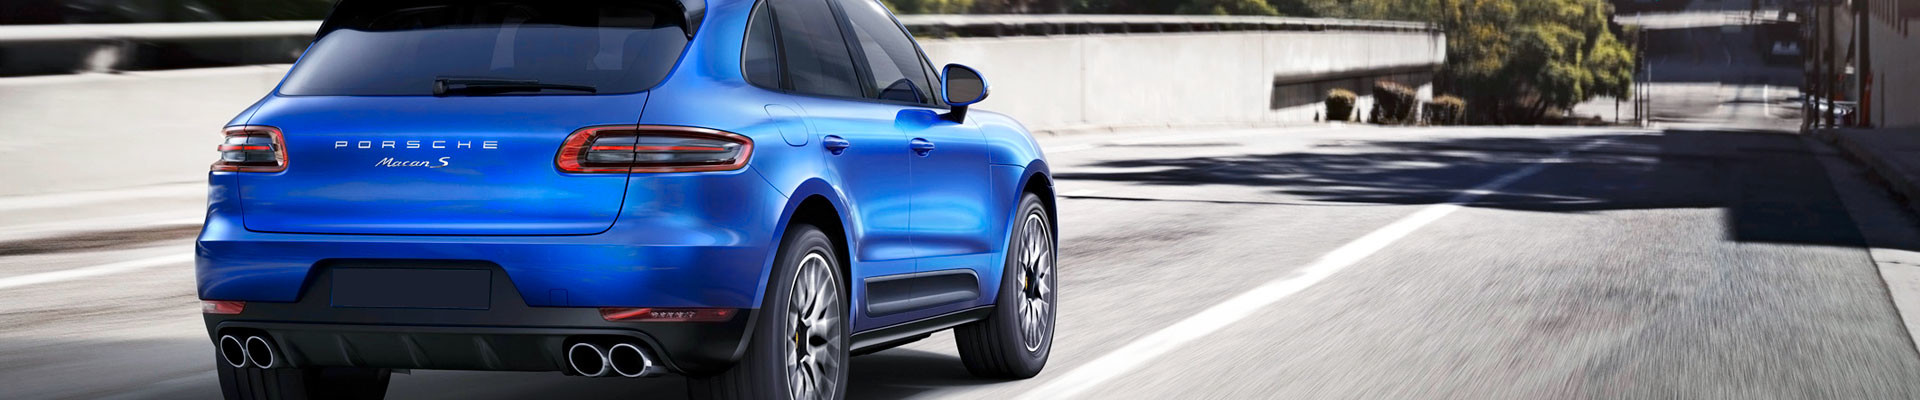 Find the maintenance service schedule for your Porsche Macan